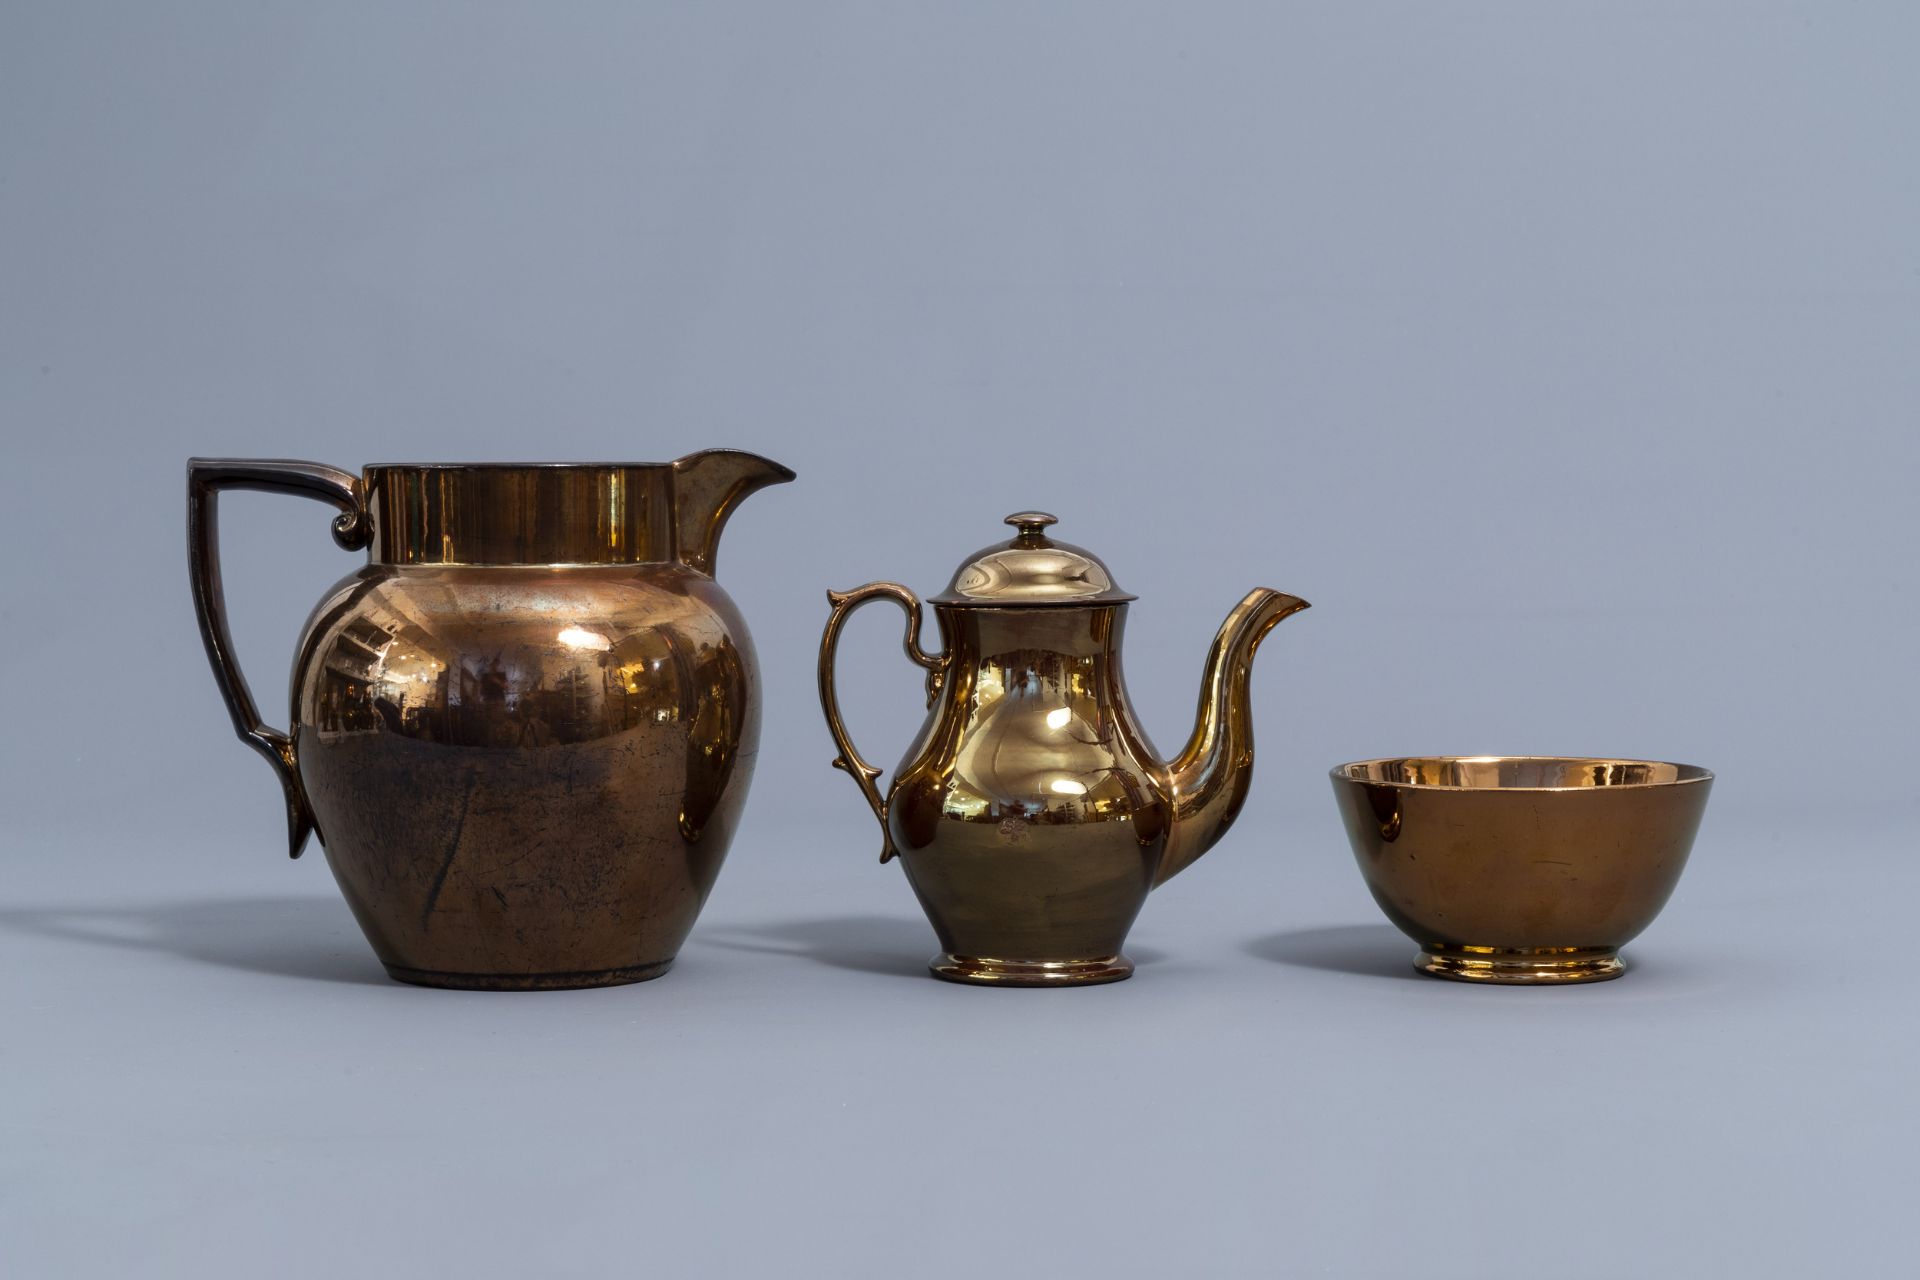 A varied collection of English monochrome copper lustreware items, 19th C. - Image 39 of 50